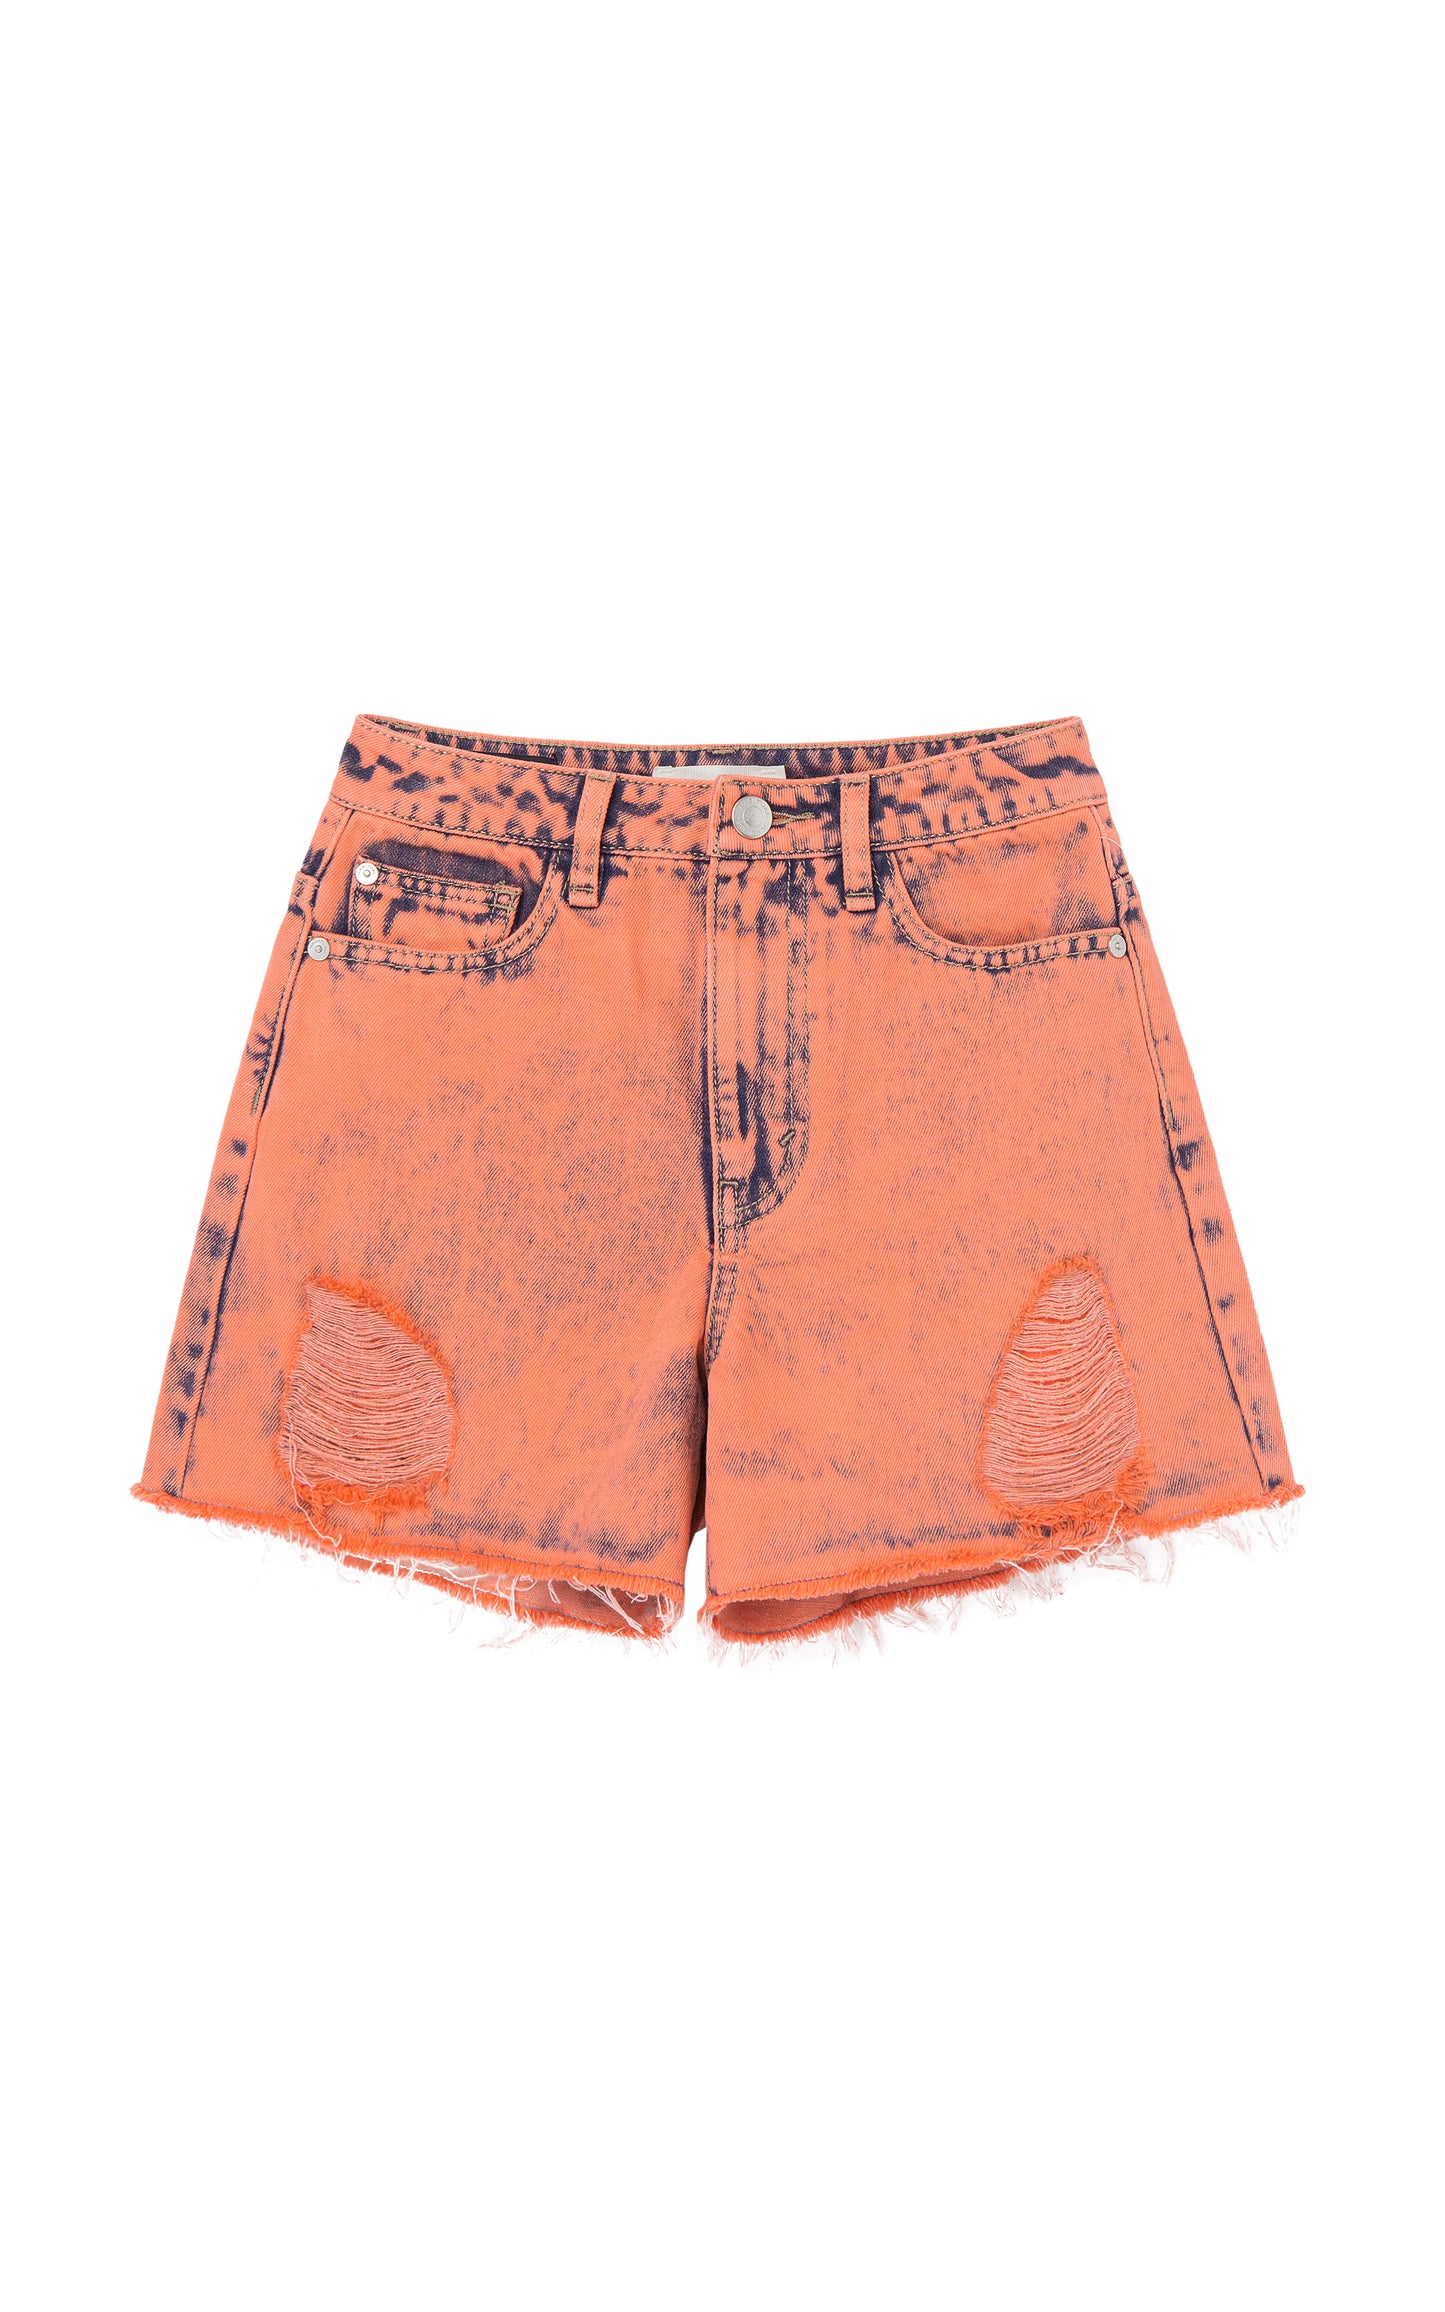 Coral, ripped-style high-waisted denim shorts